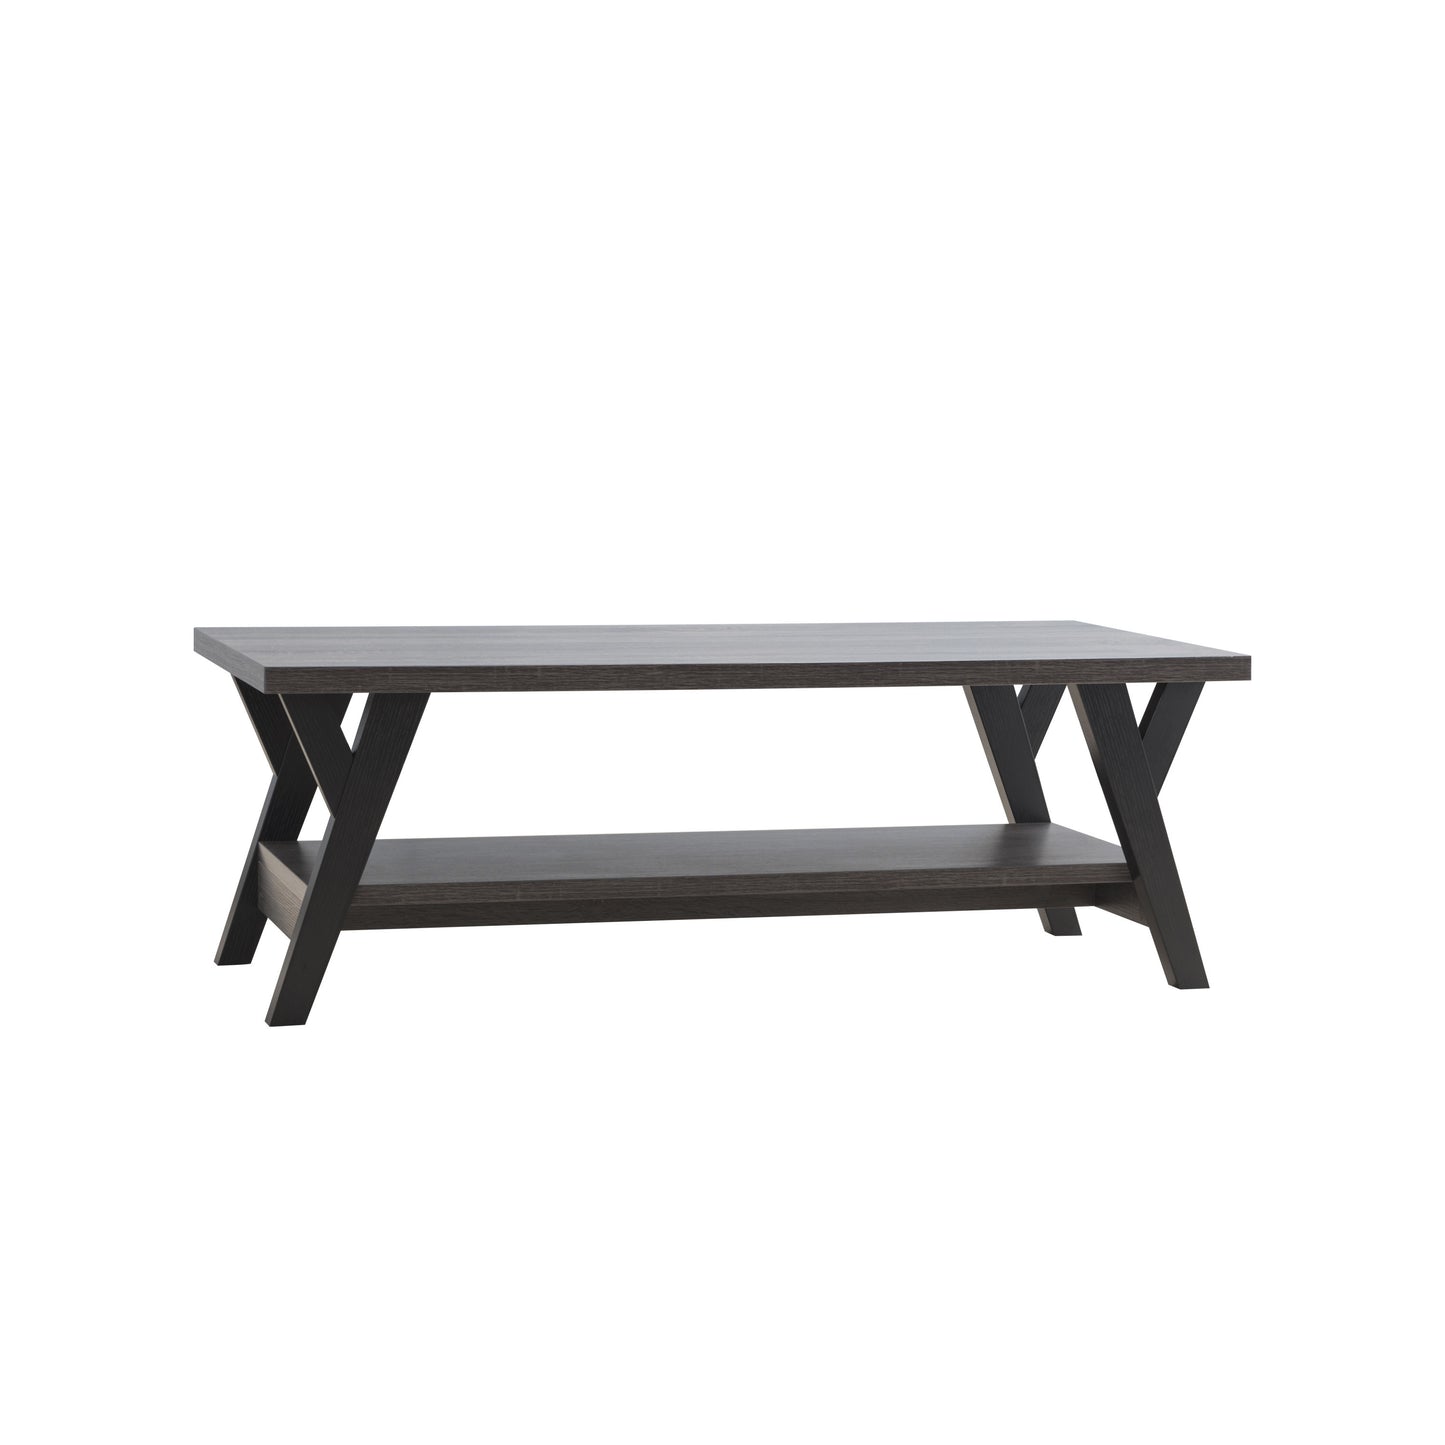 Grey and Black Distressed Coffee Table